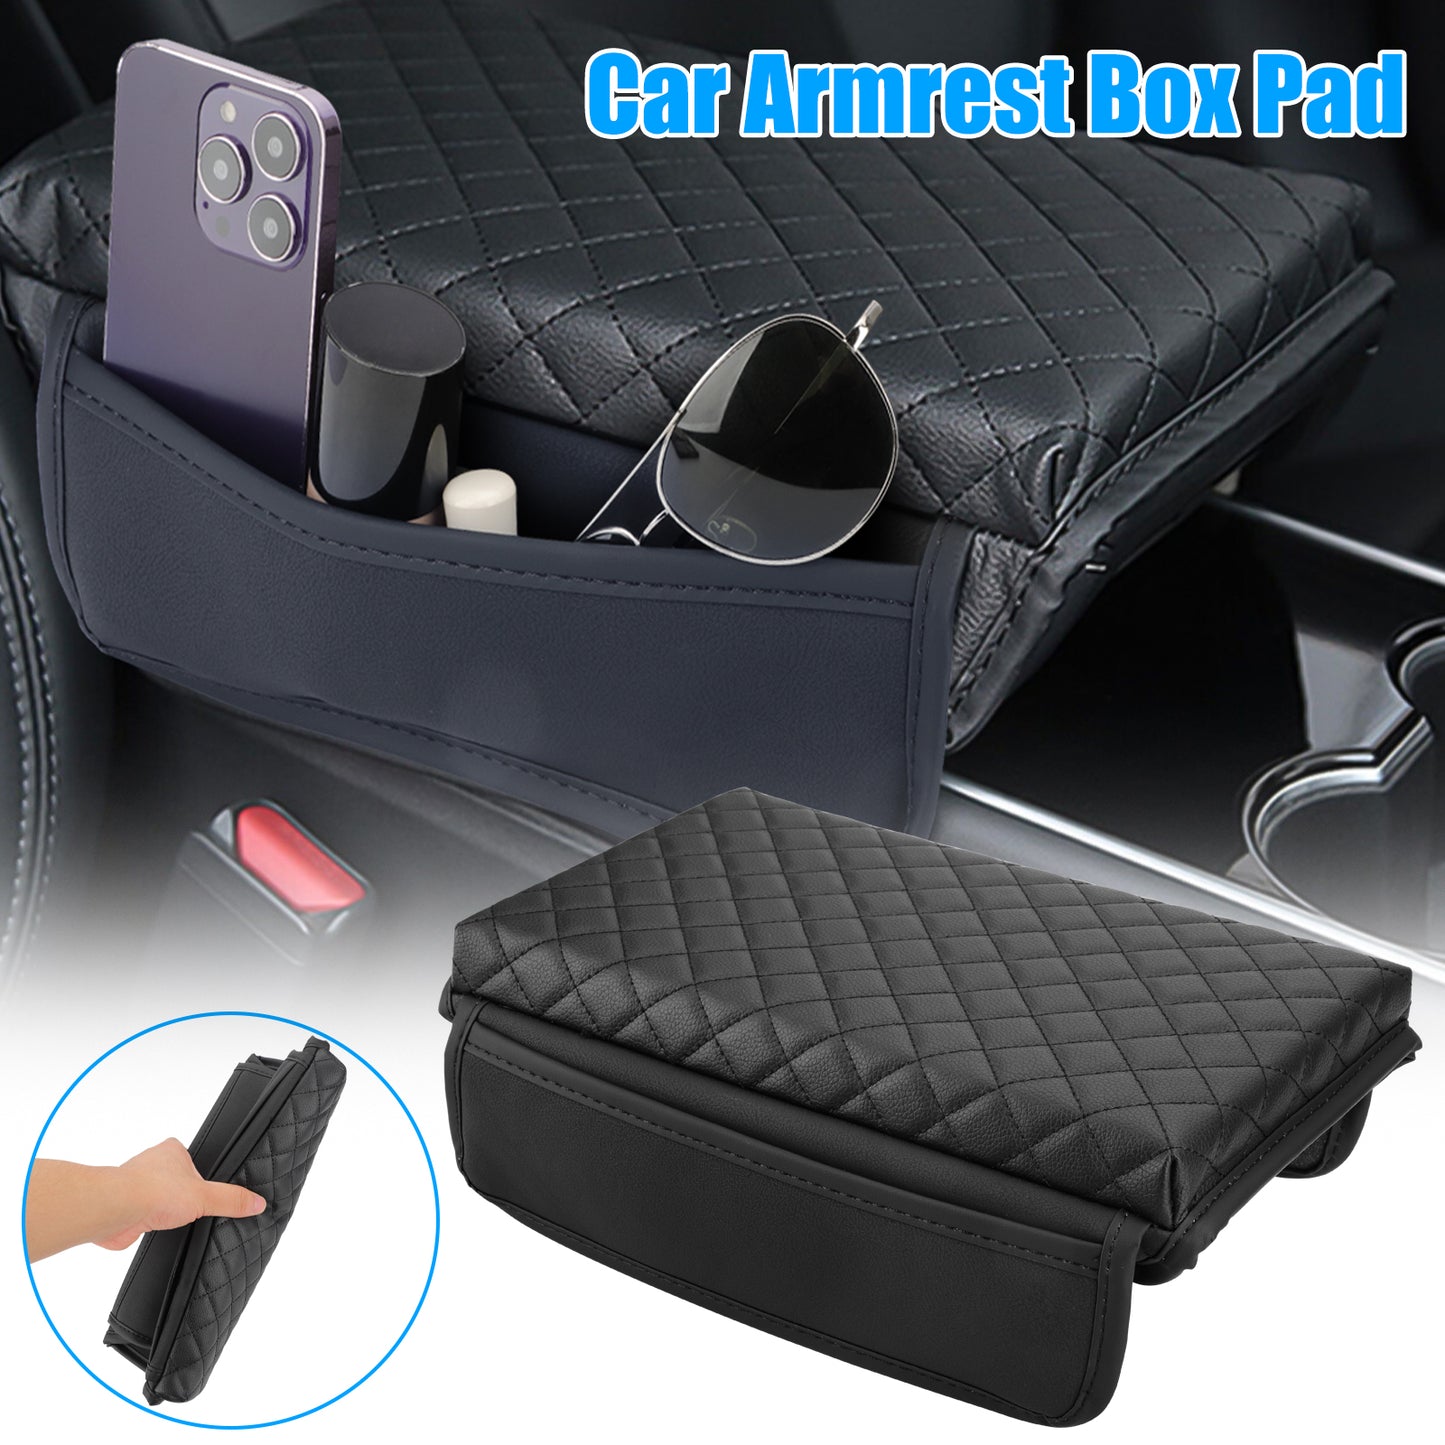 Auto Armrest Cushion Cover - PU Leather Center Console Box Pad Protector with Phone Pocket,Car Center Console Cover Pad,Auto Armrest Cover Car Accessories for SUV Vehicle Truck (Black)